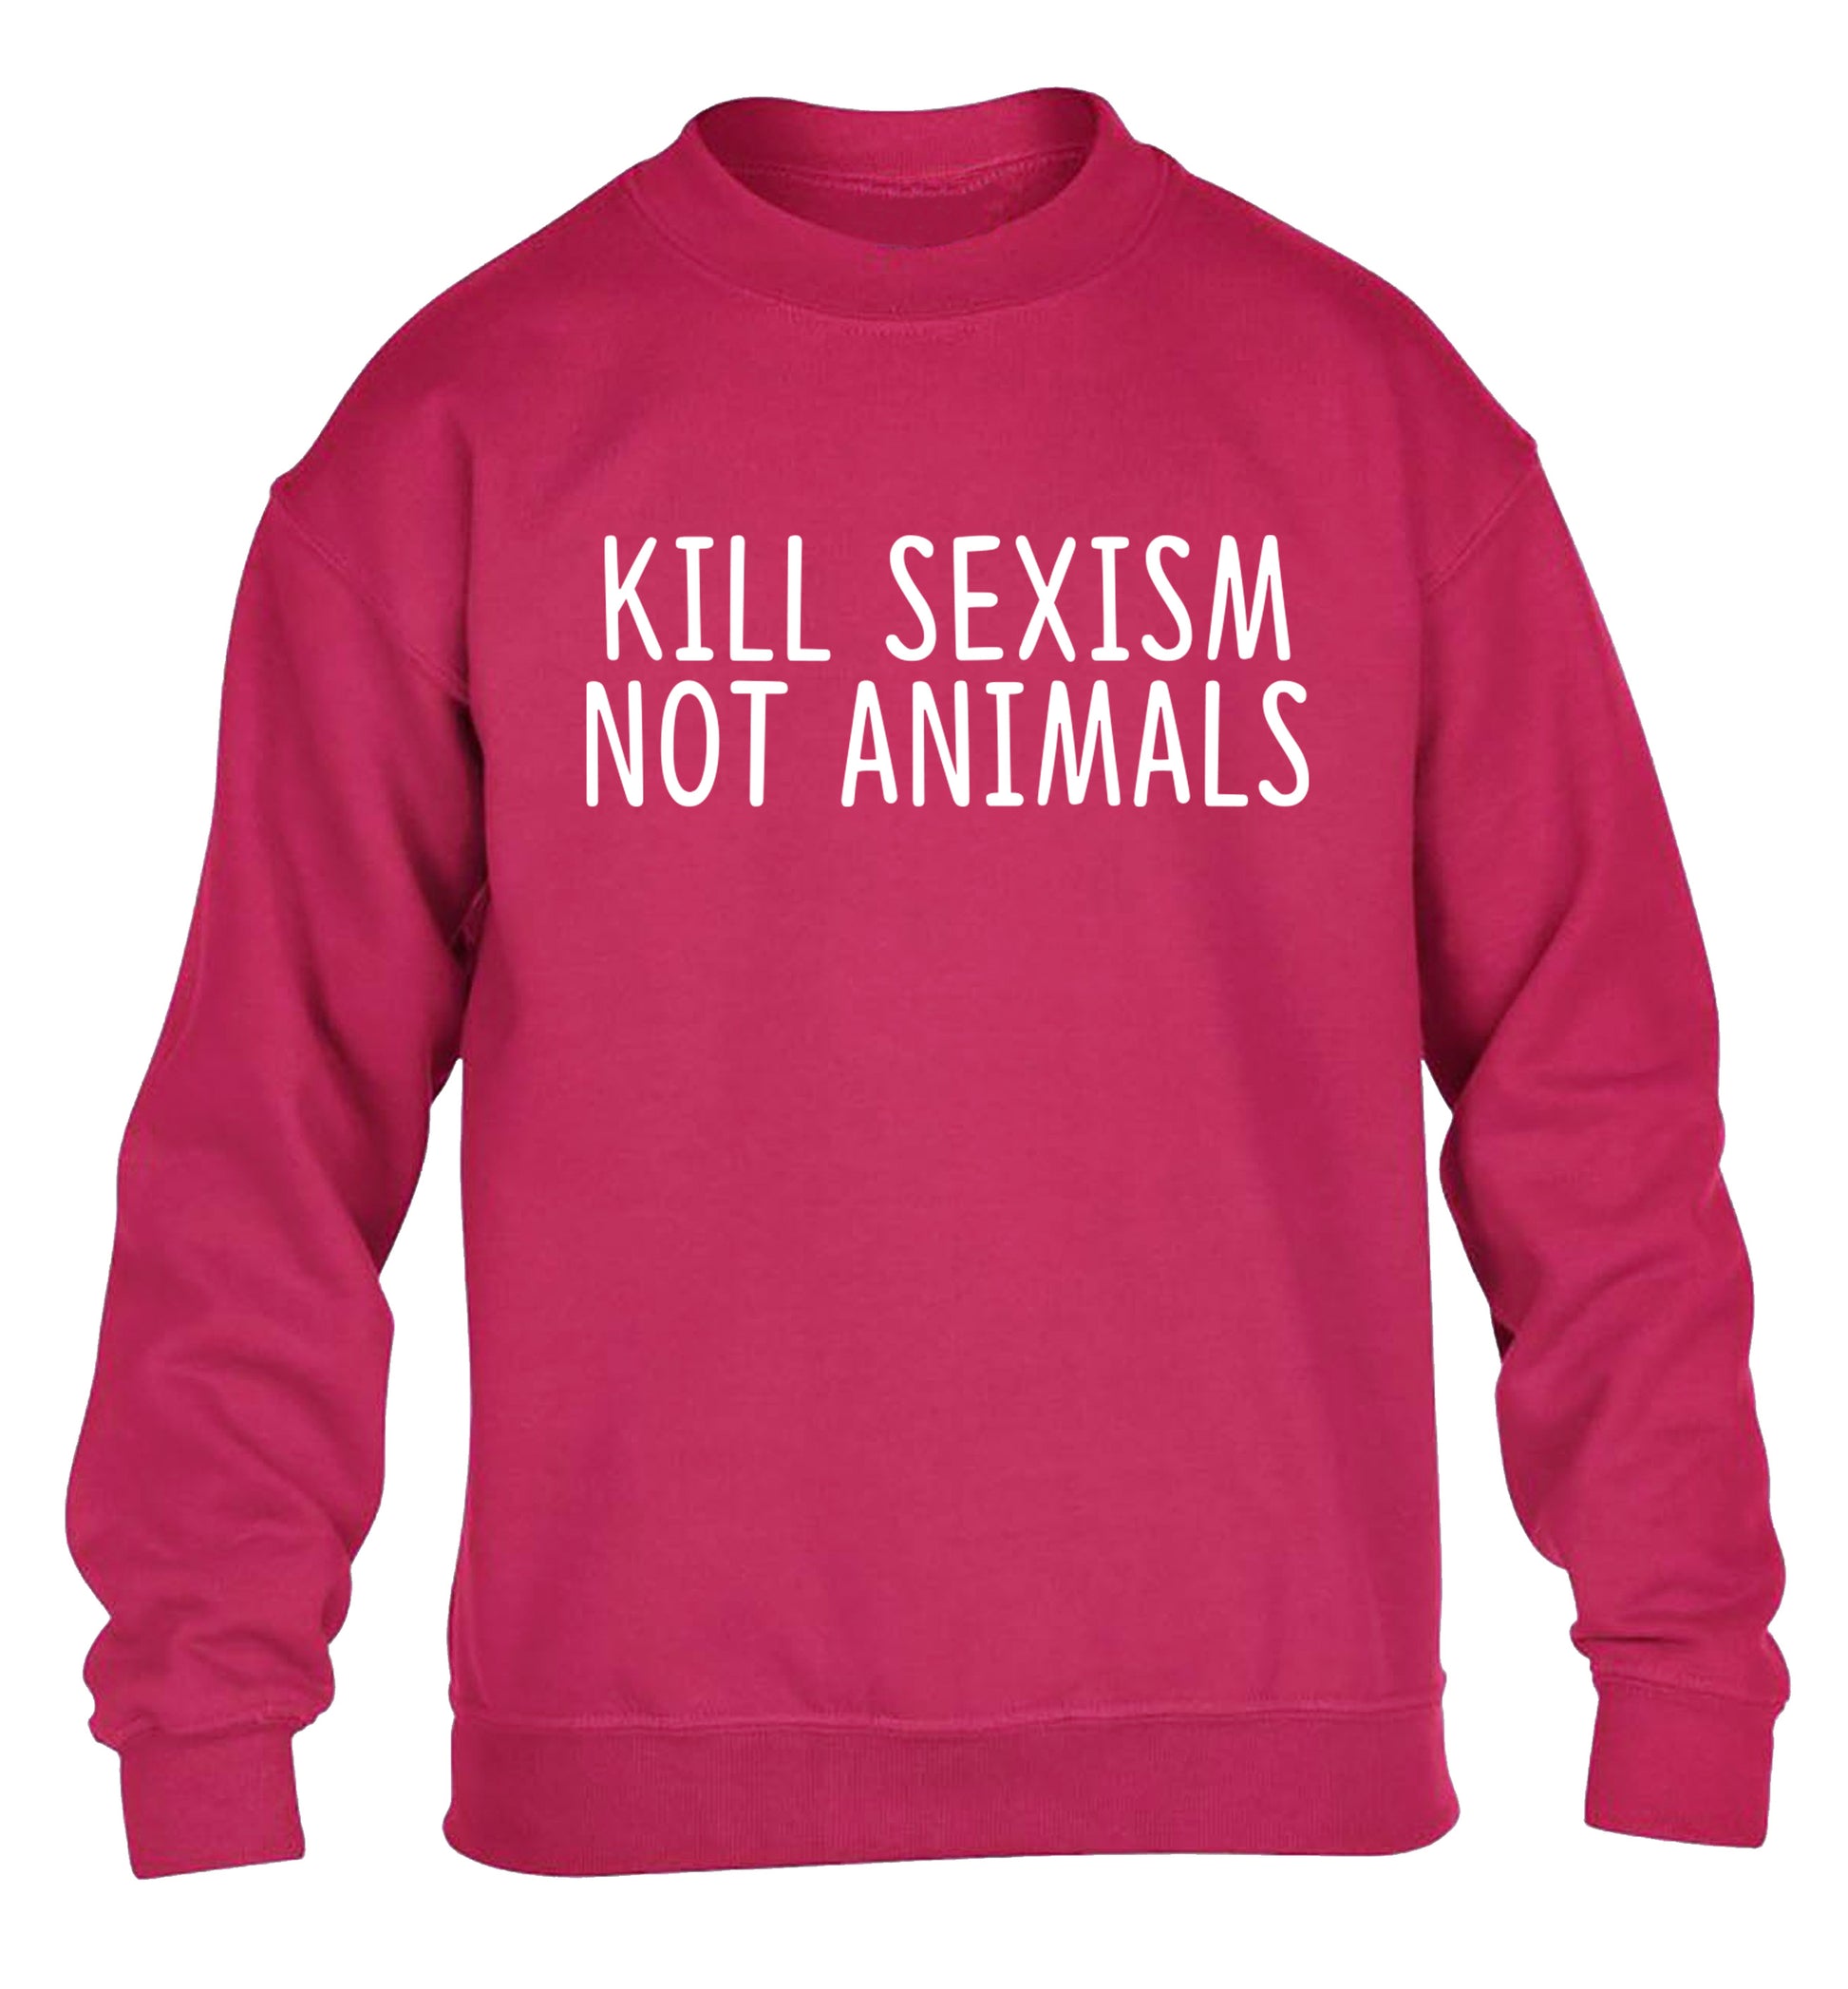 Kill Sexism Not Animals children's pink sweater 12-13 Years